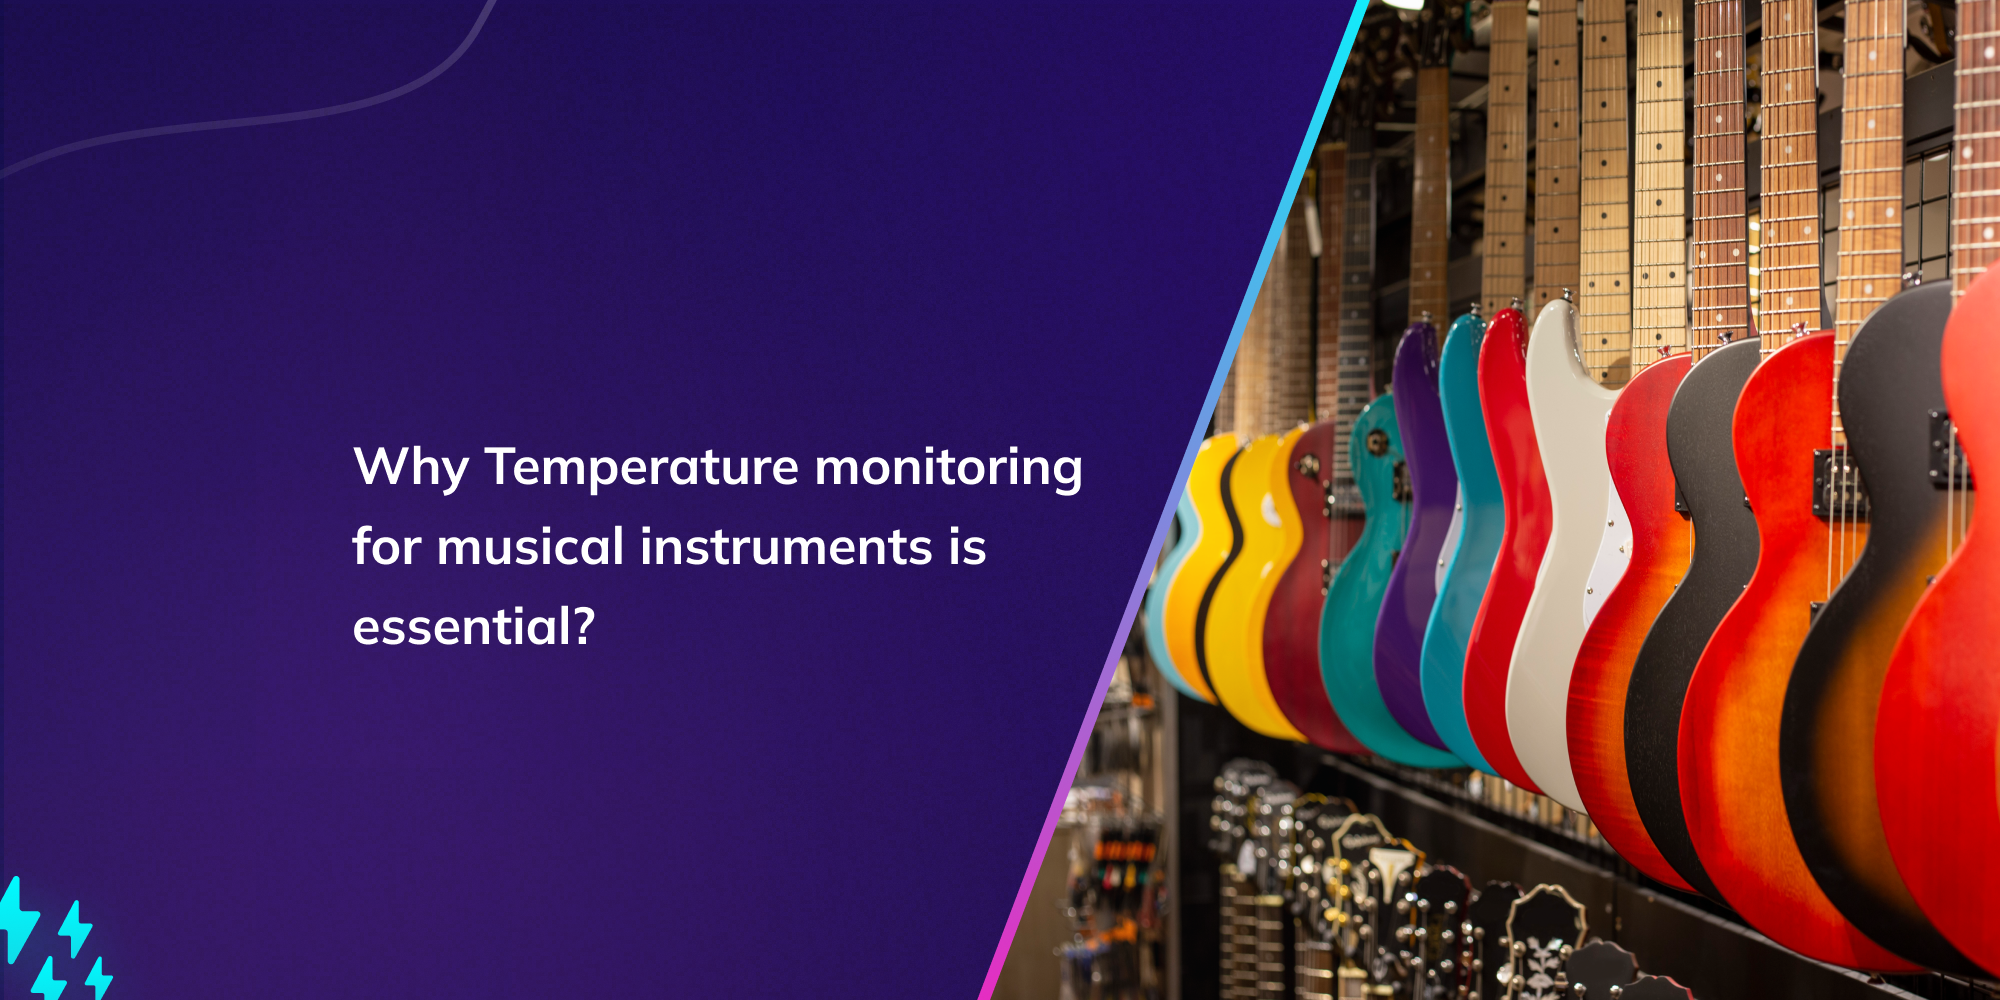 Why Temperature monitoring for musical instruments is essential?